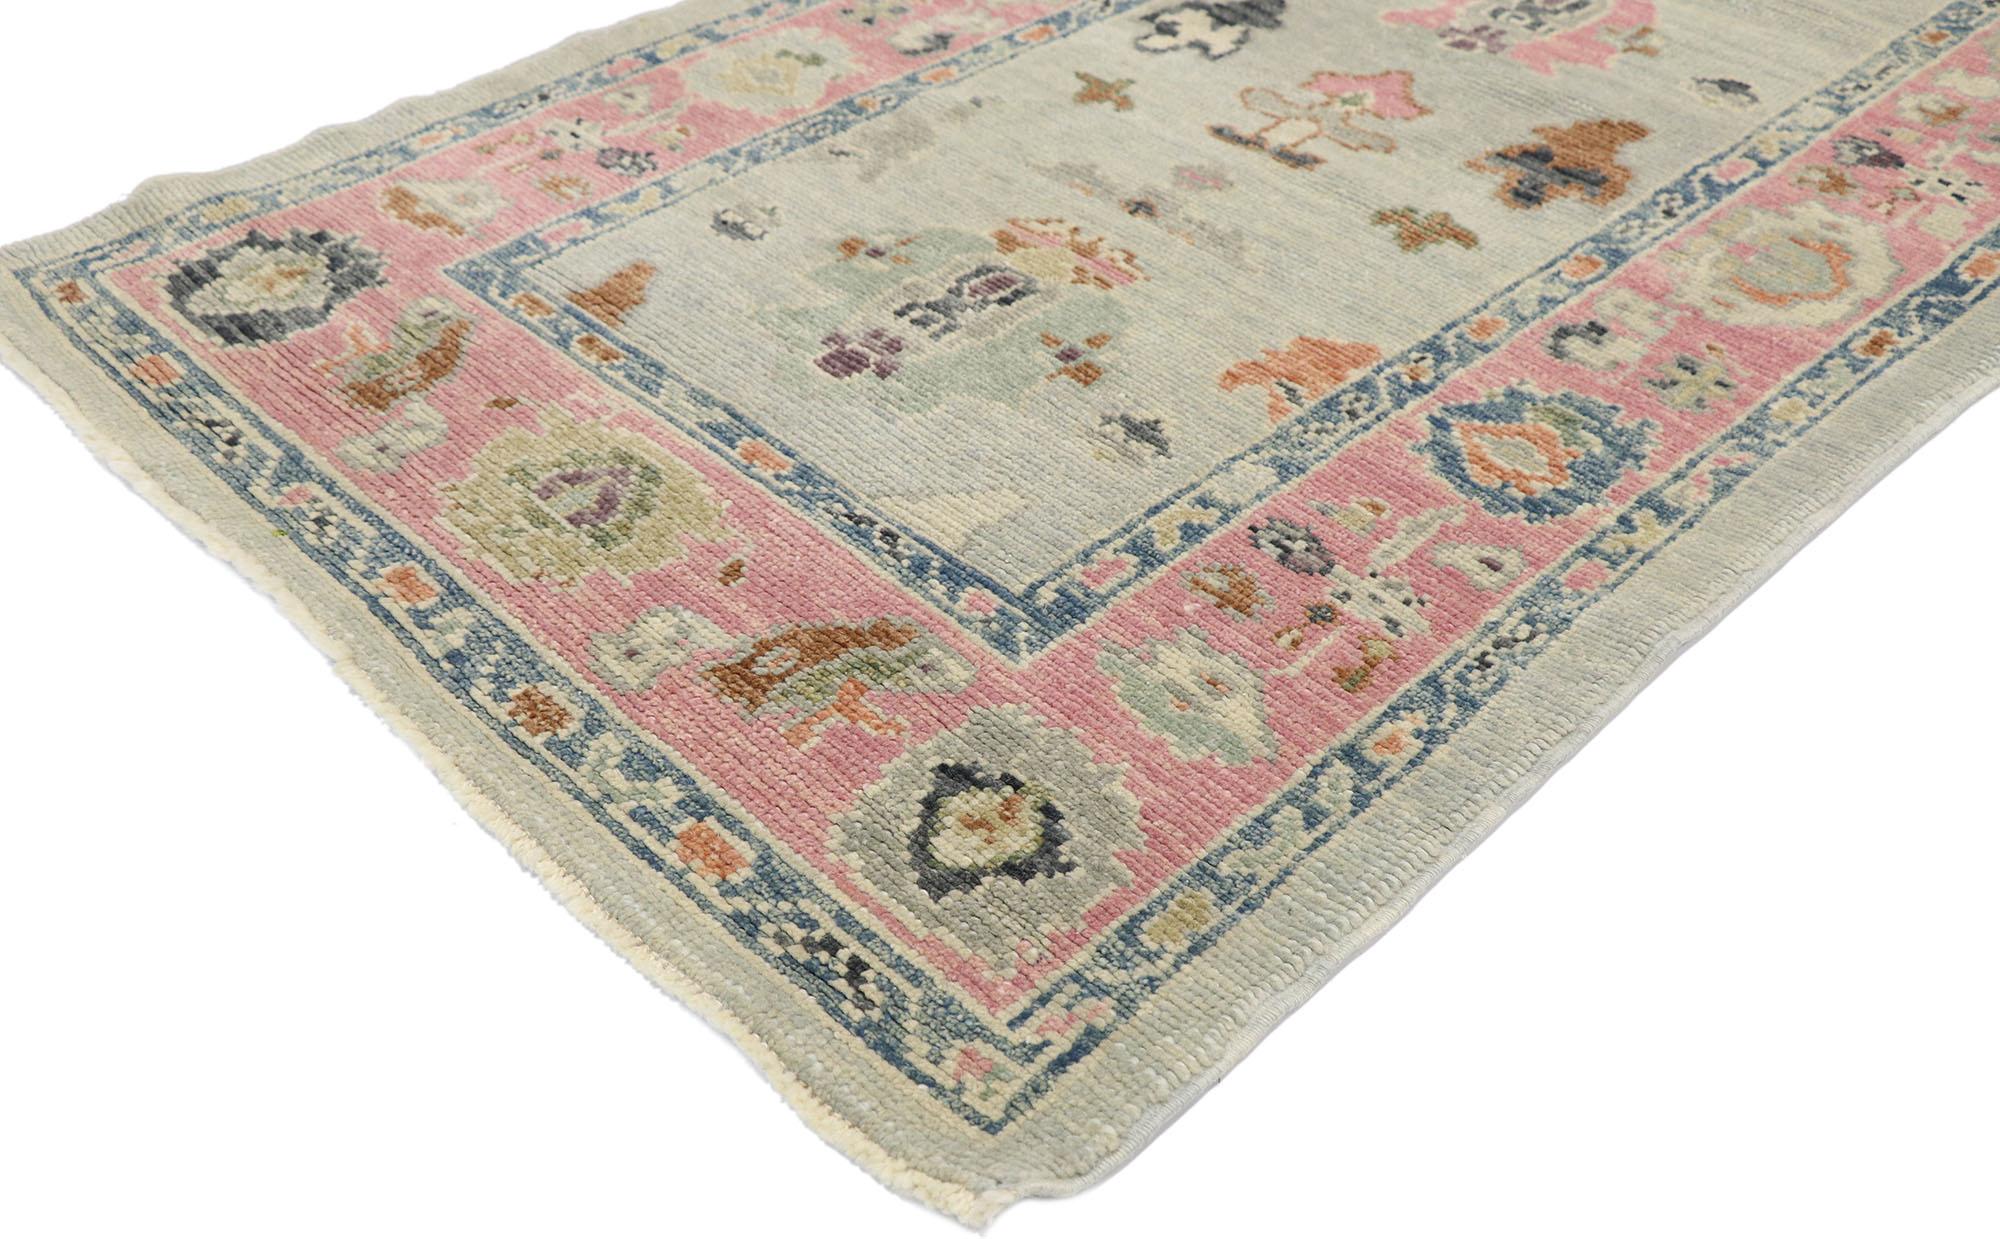 53419, new Contemporary Turkish Oushak Runner with Modern style. Blending elements from the modern world with vibrant colors, this hand knotted wool contemporary Turkish Oushak runner will boost the coziness factor in nearly any space. It features